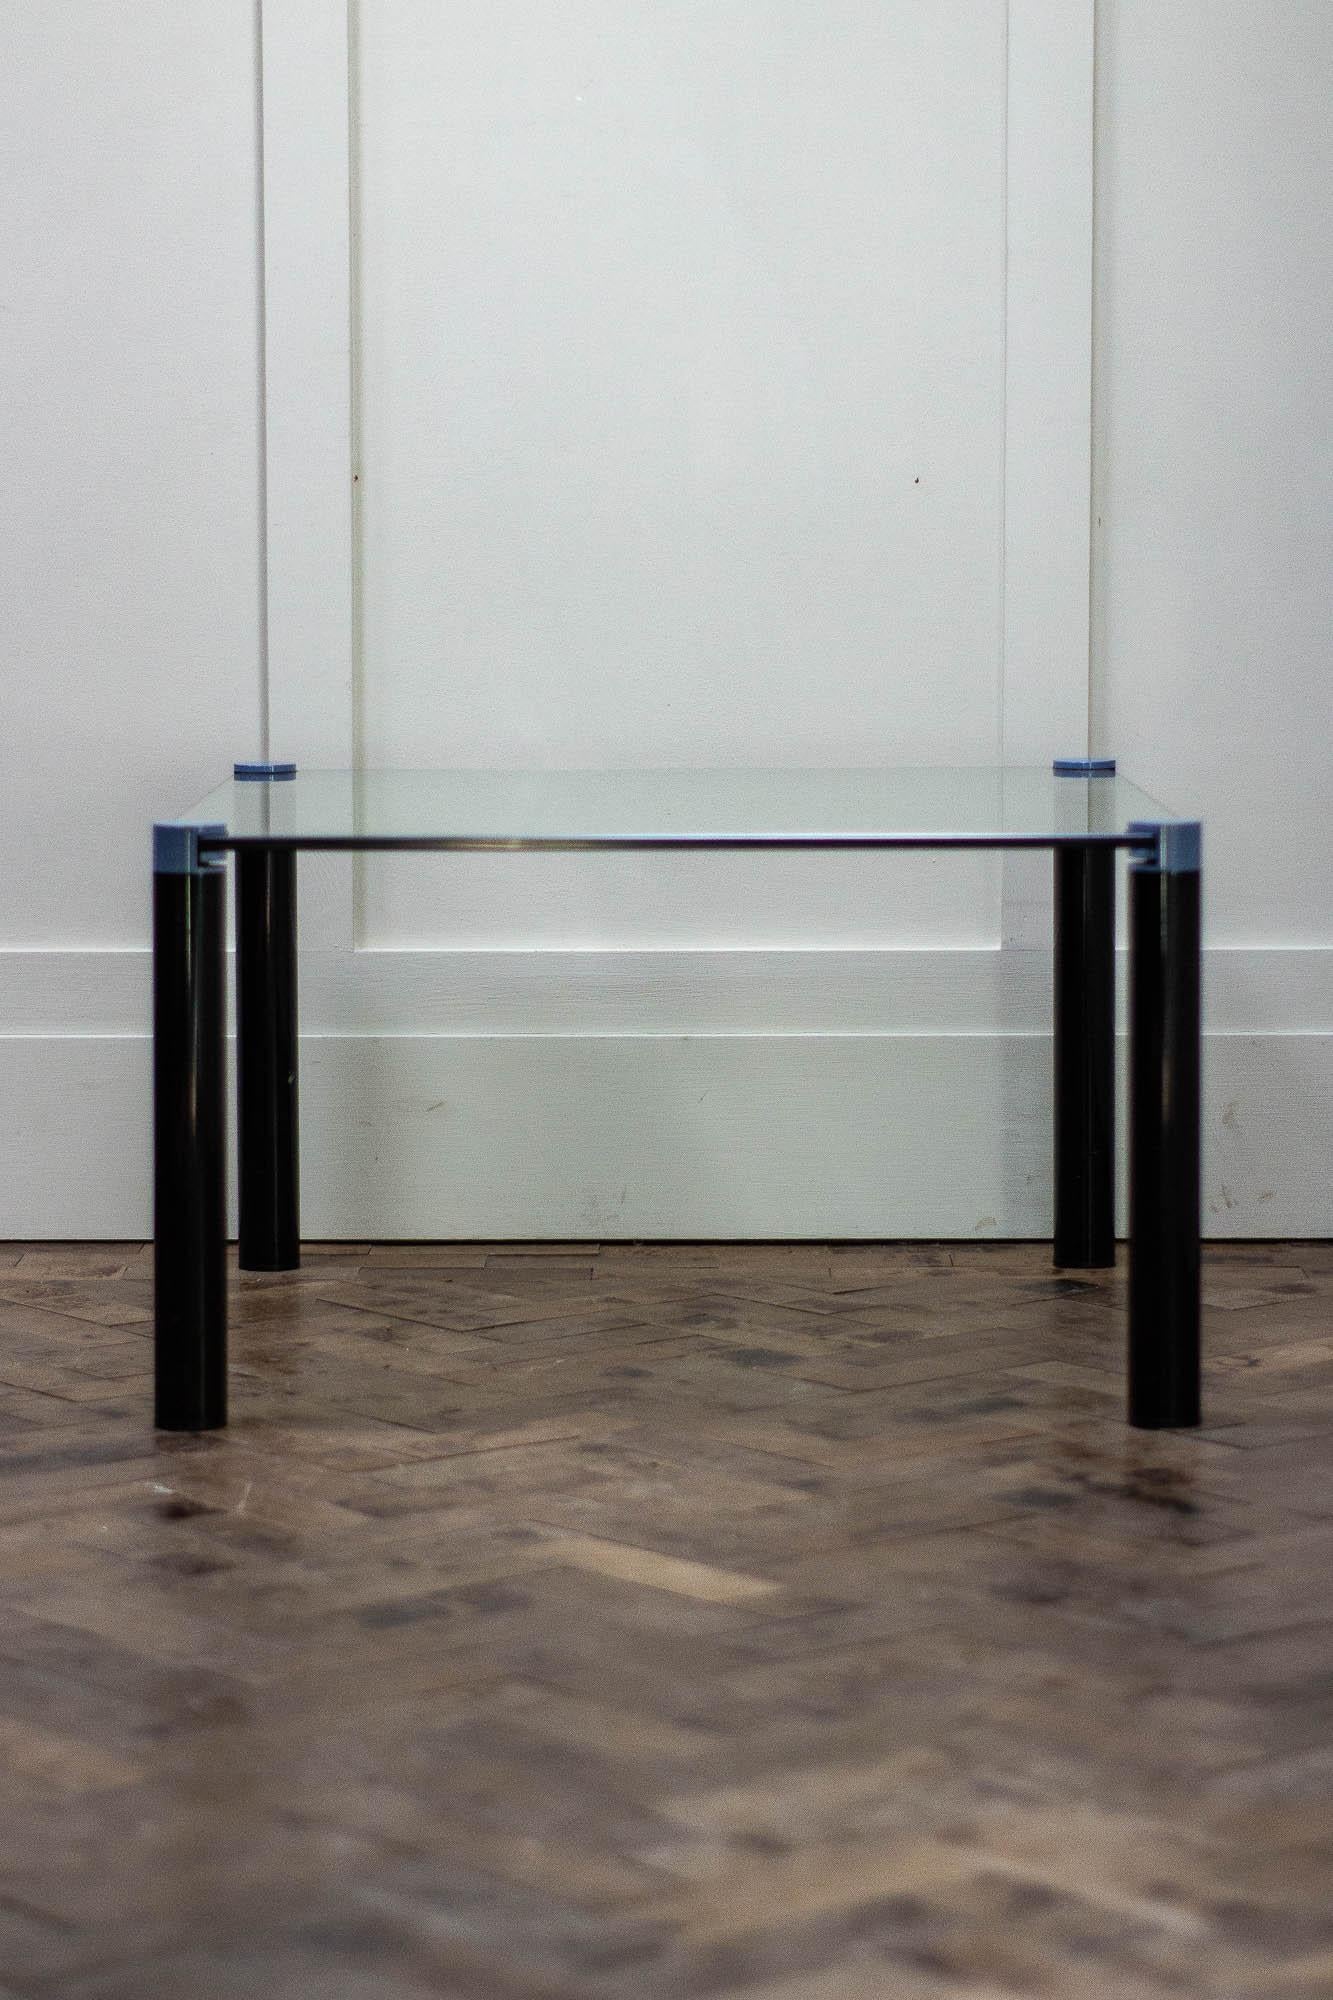 1980s Coffee/Side table with clear glass top and screw off legs.

The two port tubular steel legs are painted black with a purple top section. 

Inspired by the designer Peter Ghyczy.

Height 41cm
Width 70cm
Depth 70cm